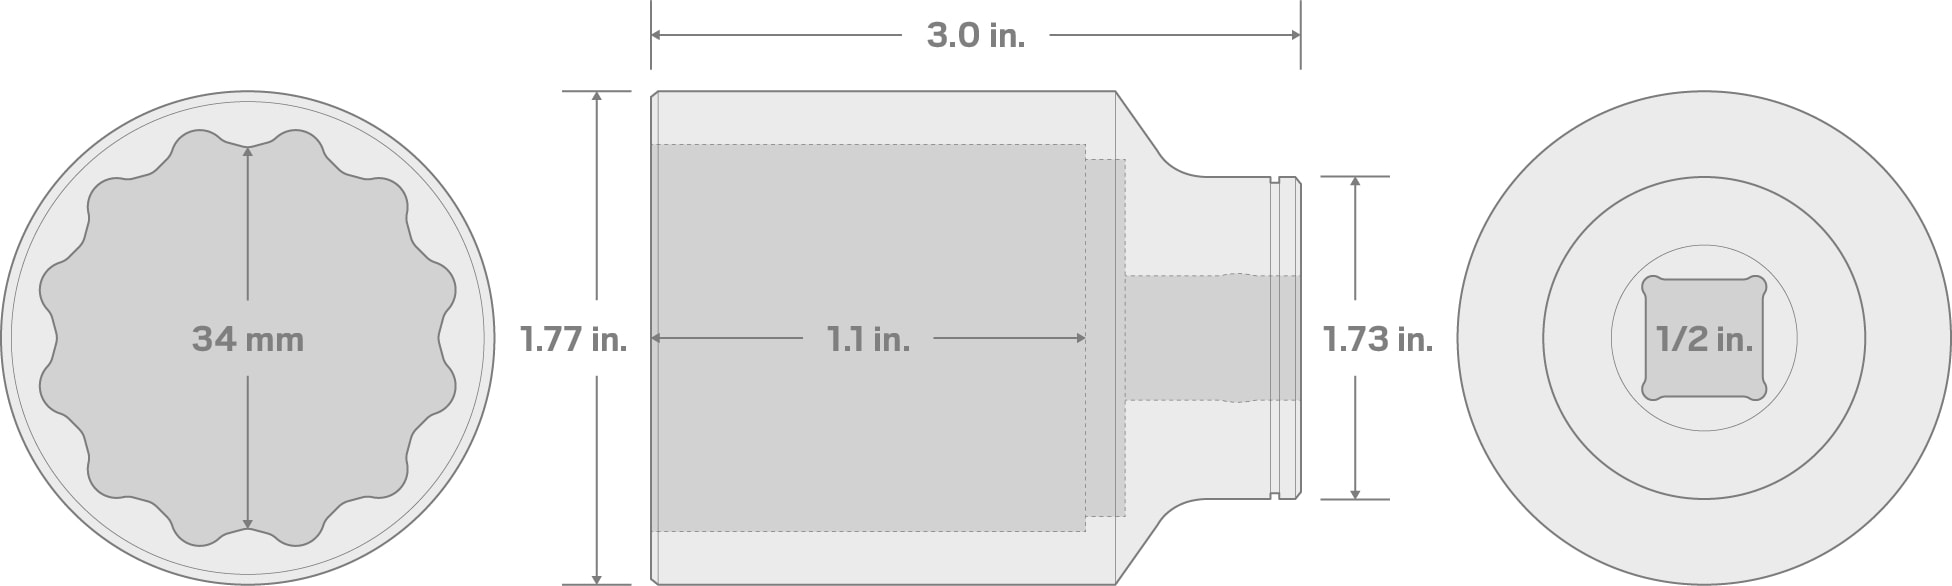 Specs for 1/2 Inch Drive x 34 mm Deep 12-Point Socket